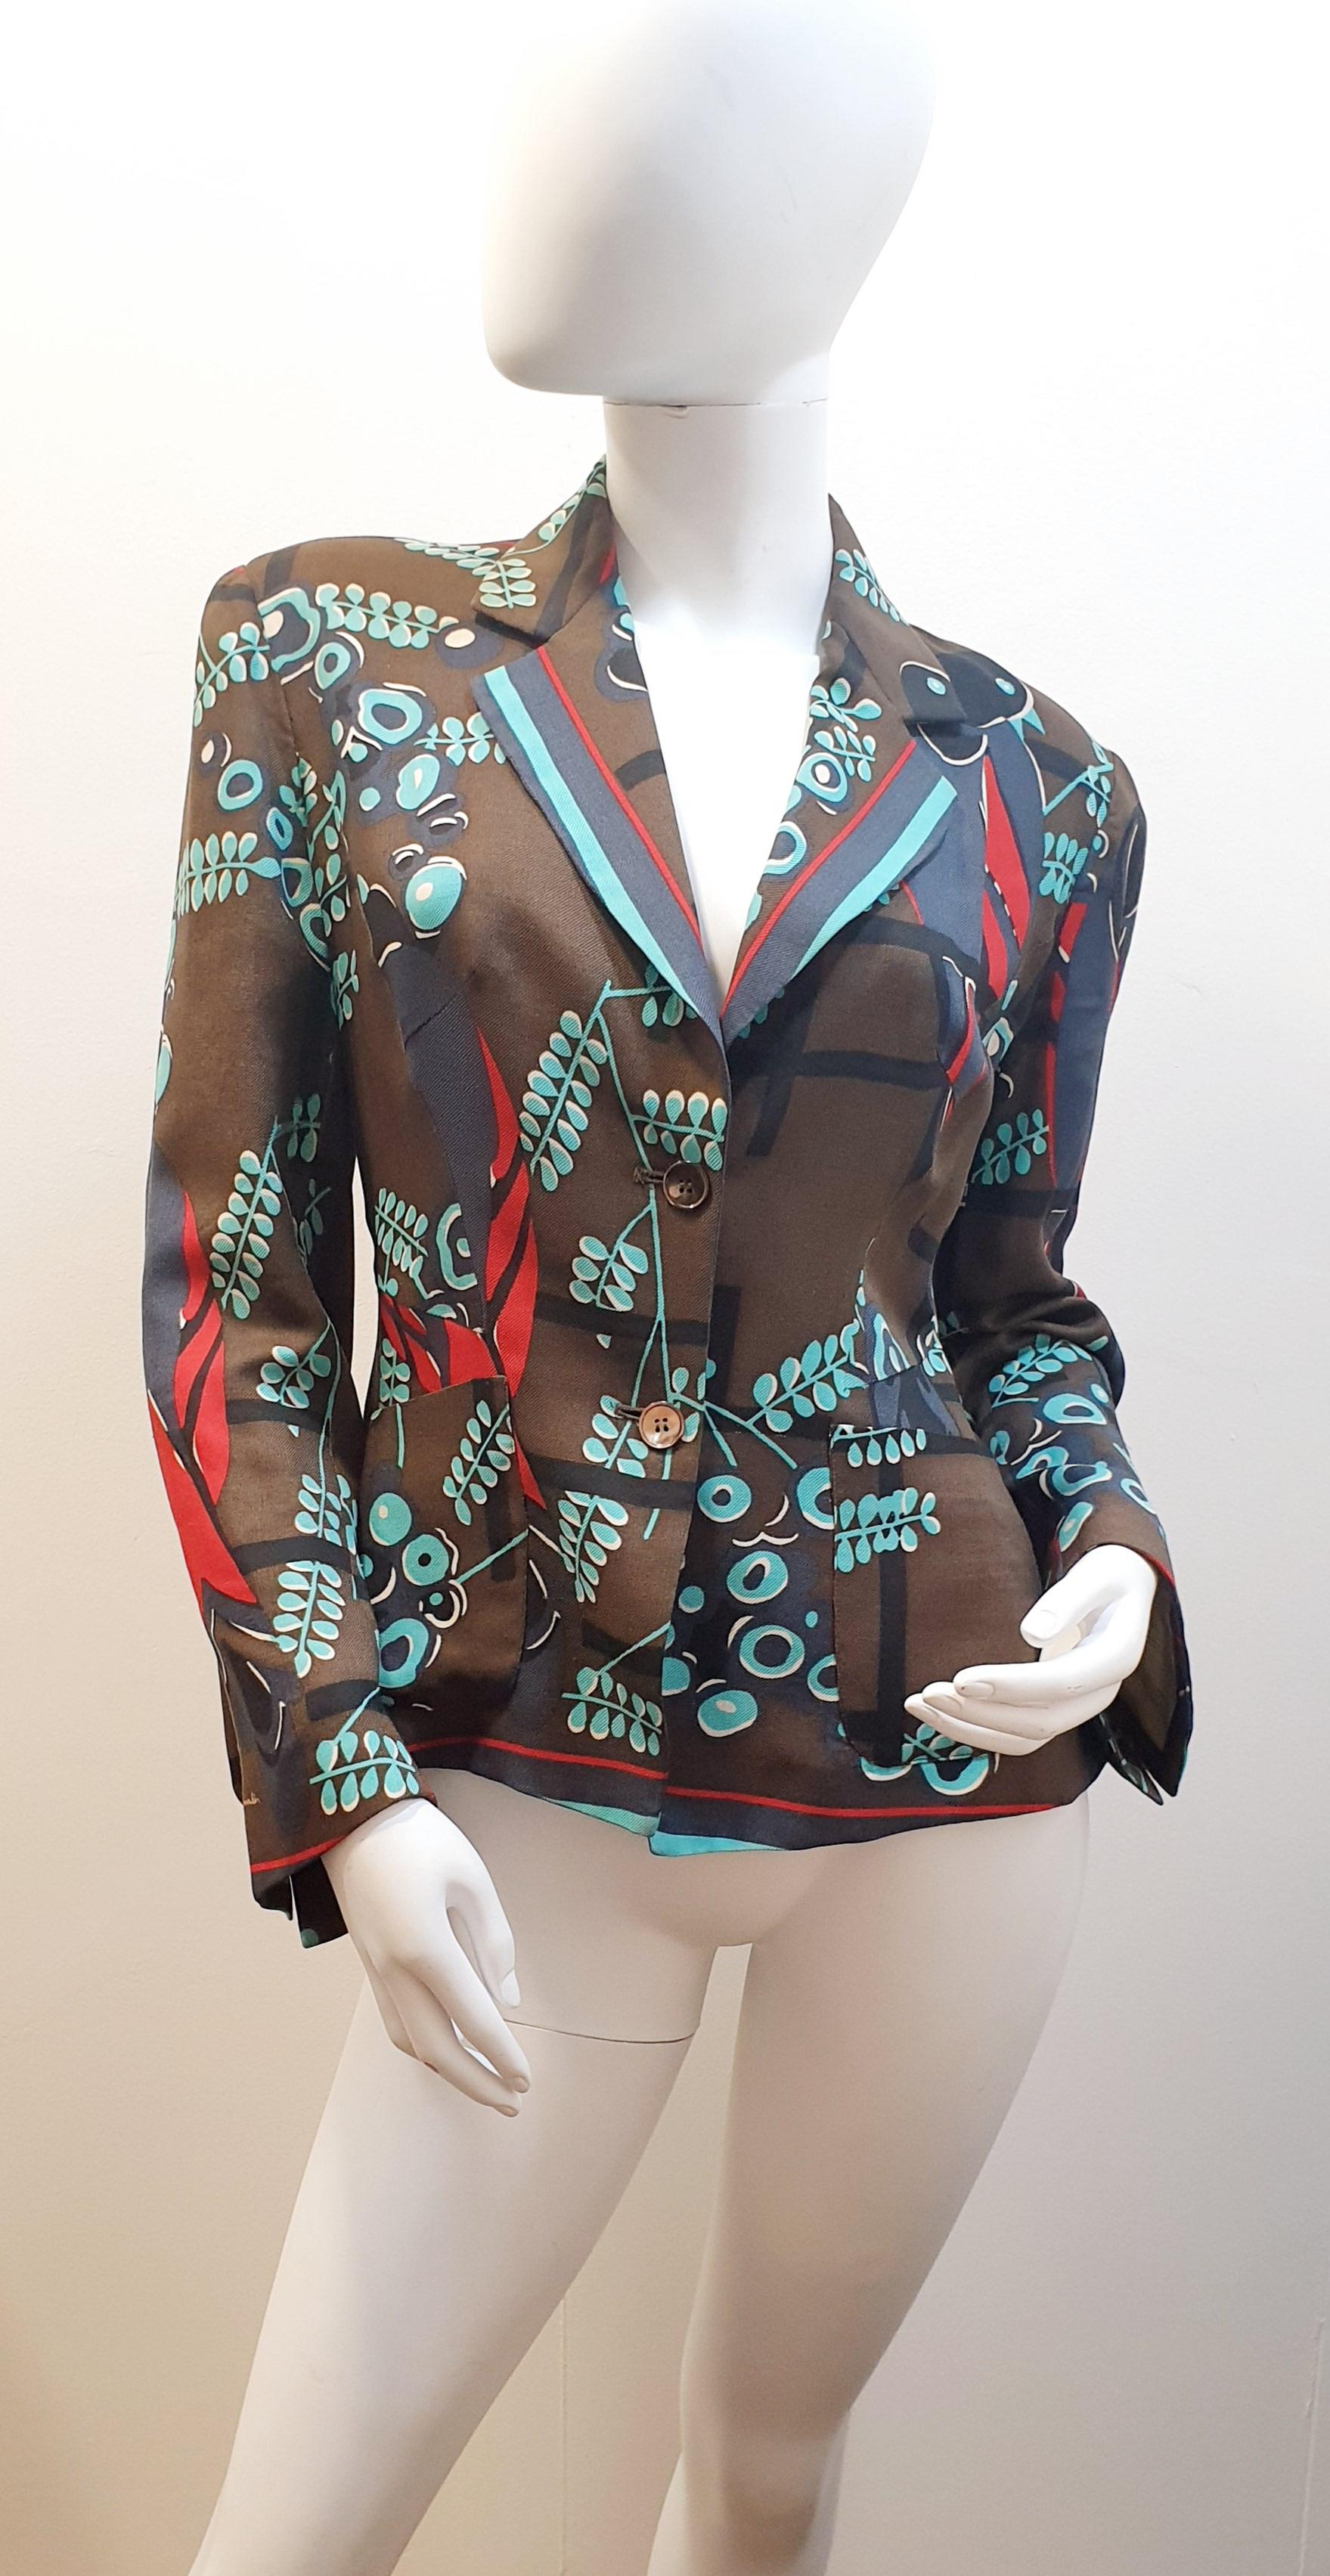 PAUL SMITH Brown Silk Cotton Blend Bold Floral Print Blazer Jacket
Material: 70% Wool 30% Silk
Colour:	Brown	
Type:	Jacket
Size   42

Our Company Fashion Division is specialized in European Fashion designers, clothing, handbags, accessories and as